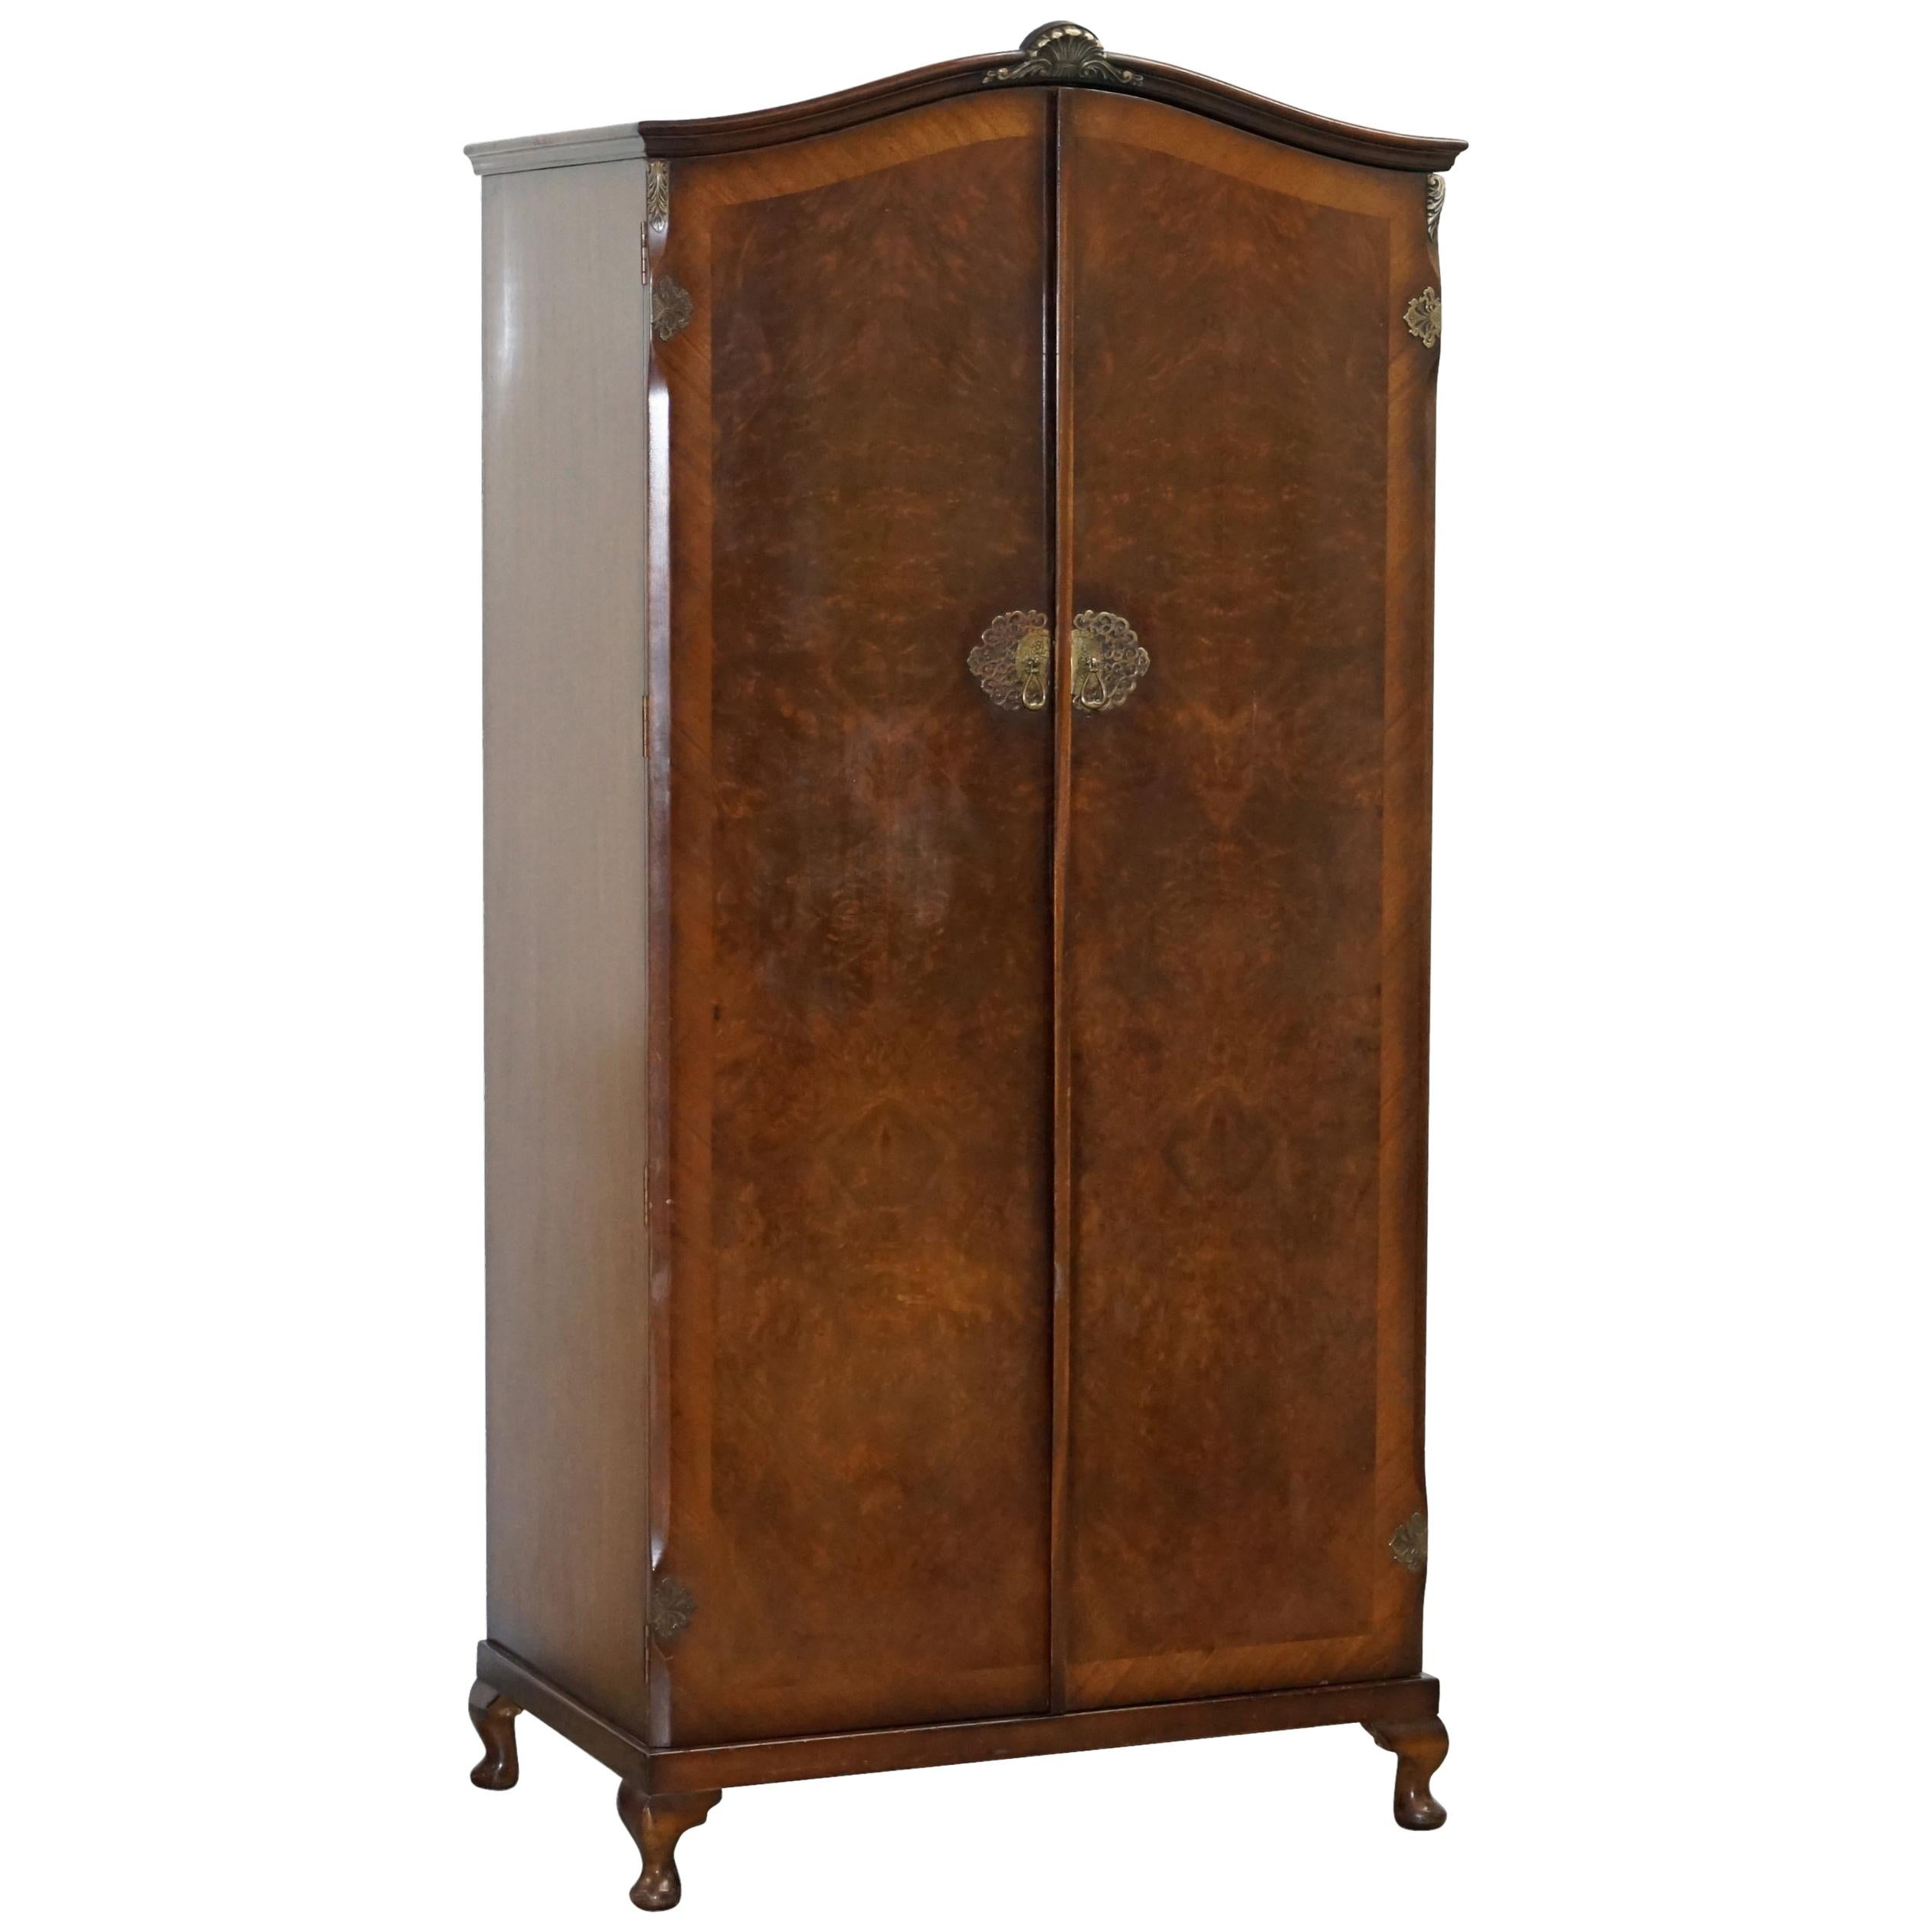 1930s Burr Walnut Double Bank Wardrobe and Pigeon Holes One of Two Part of Suite